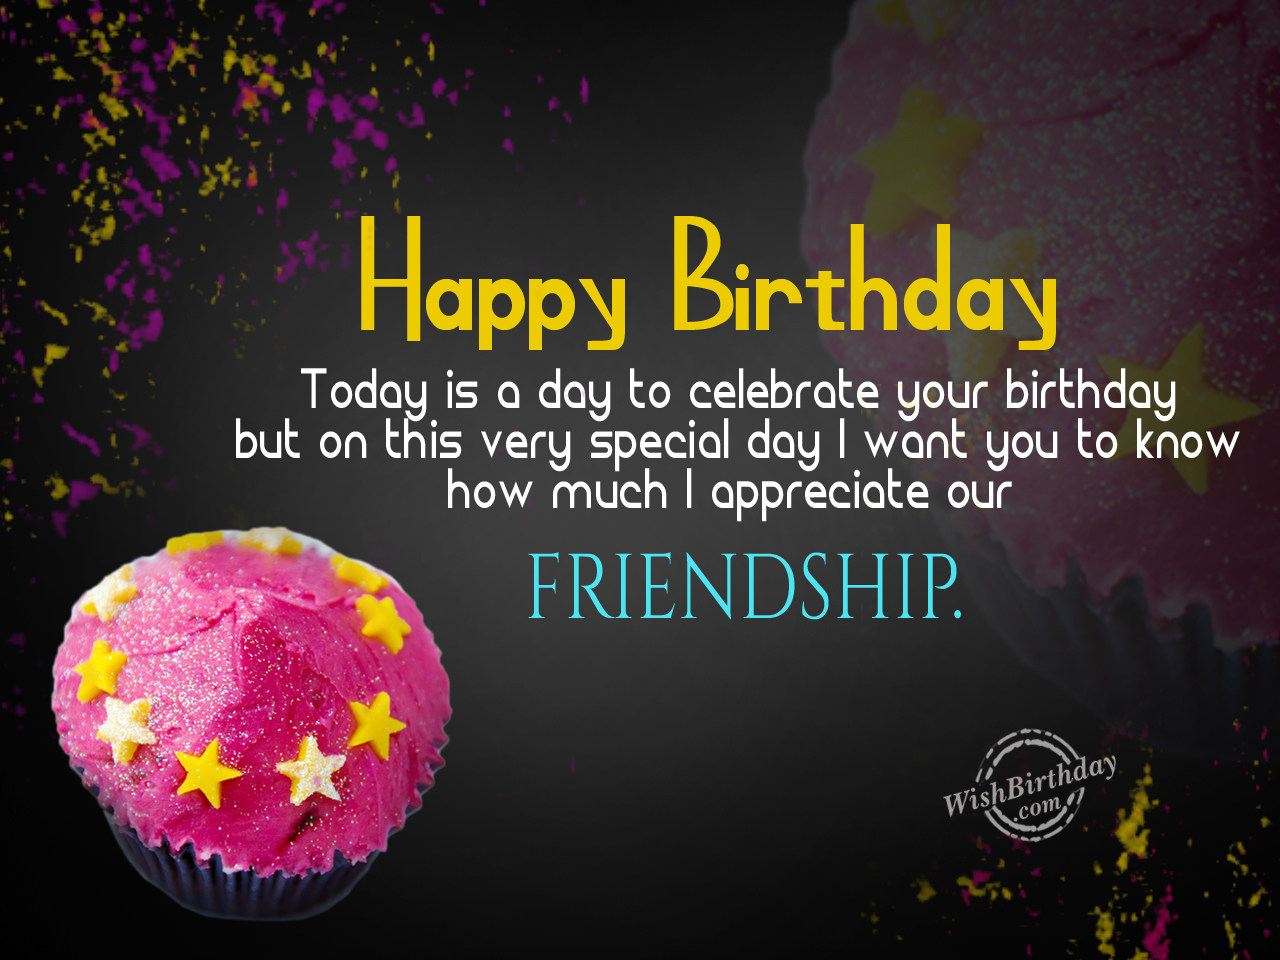 Birthday Wishes For Best Friend - Birthday Images, Pictures